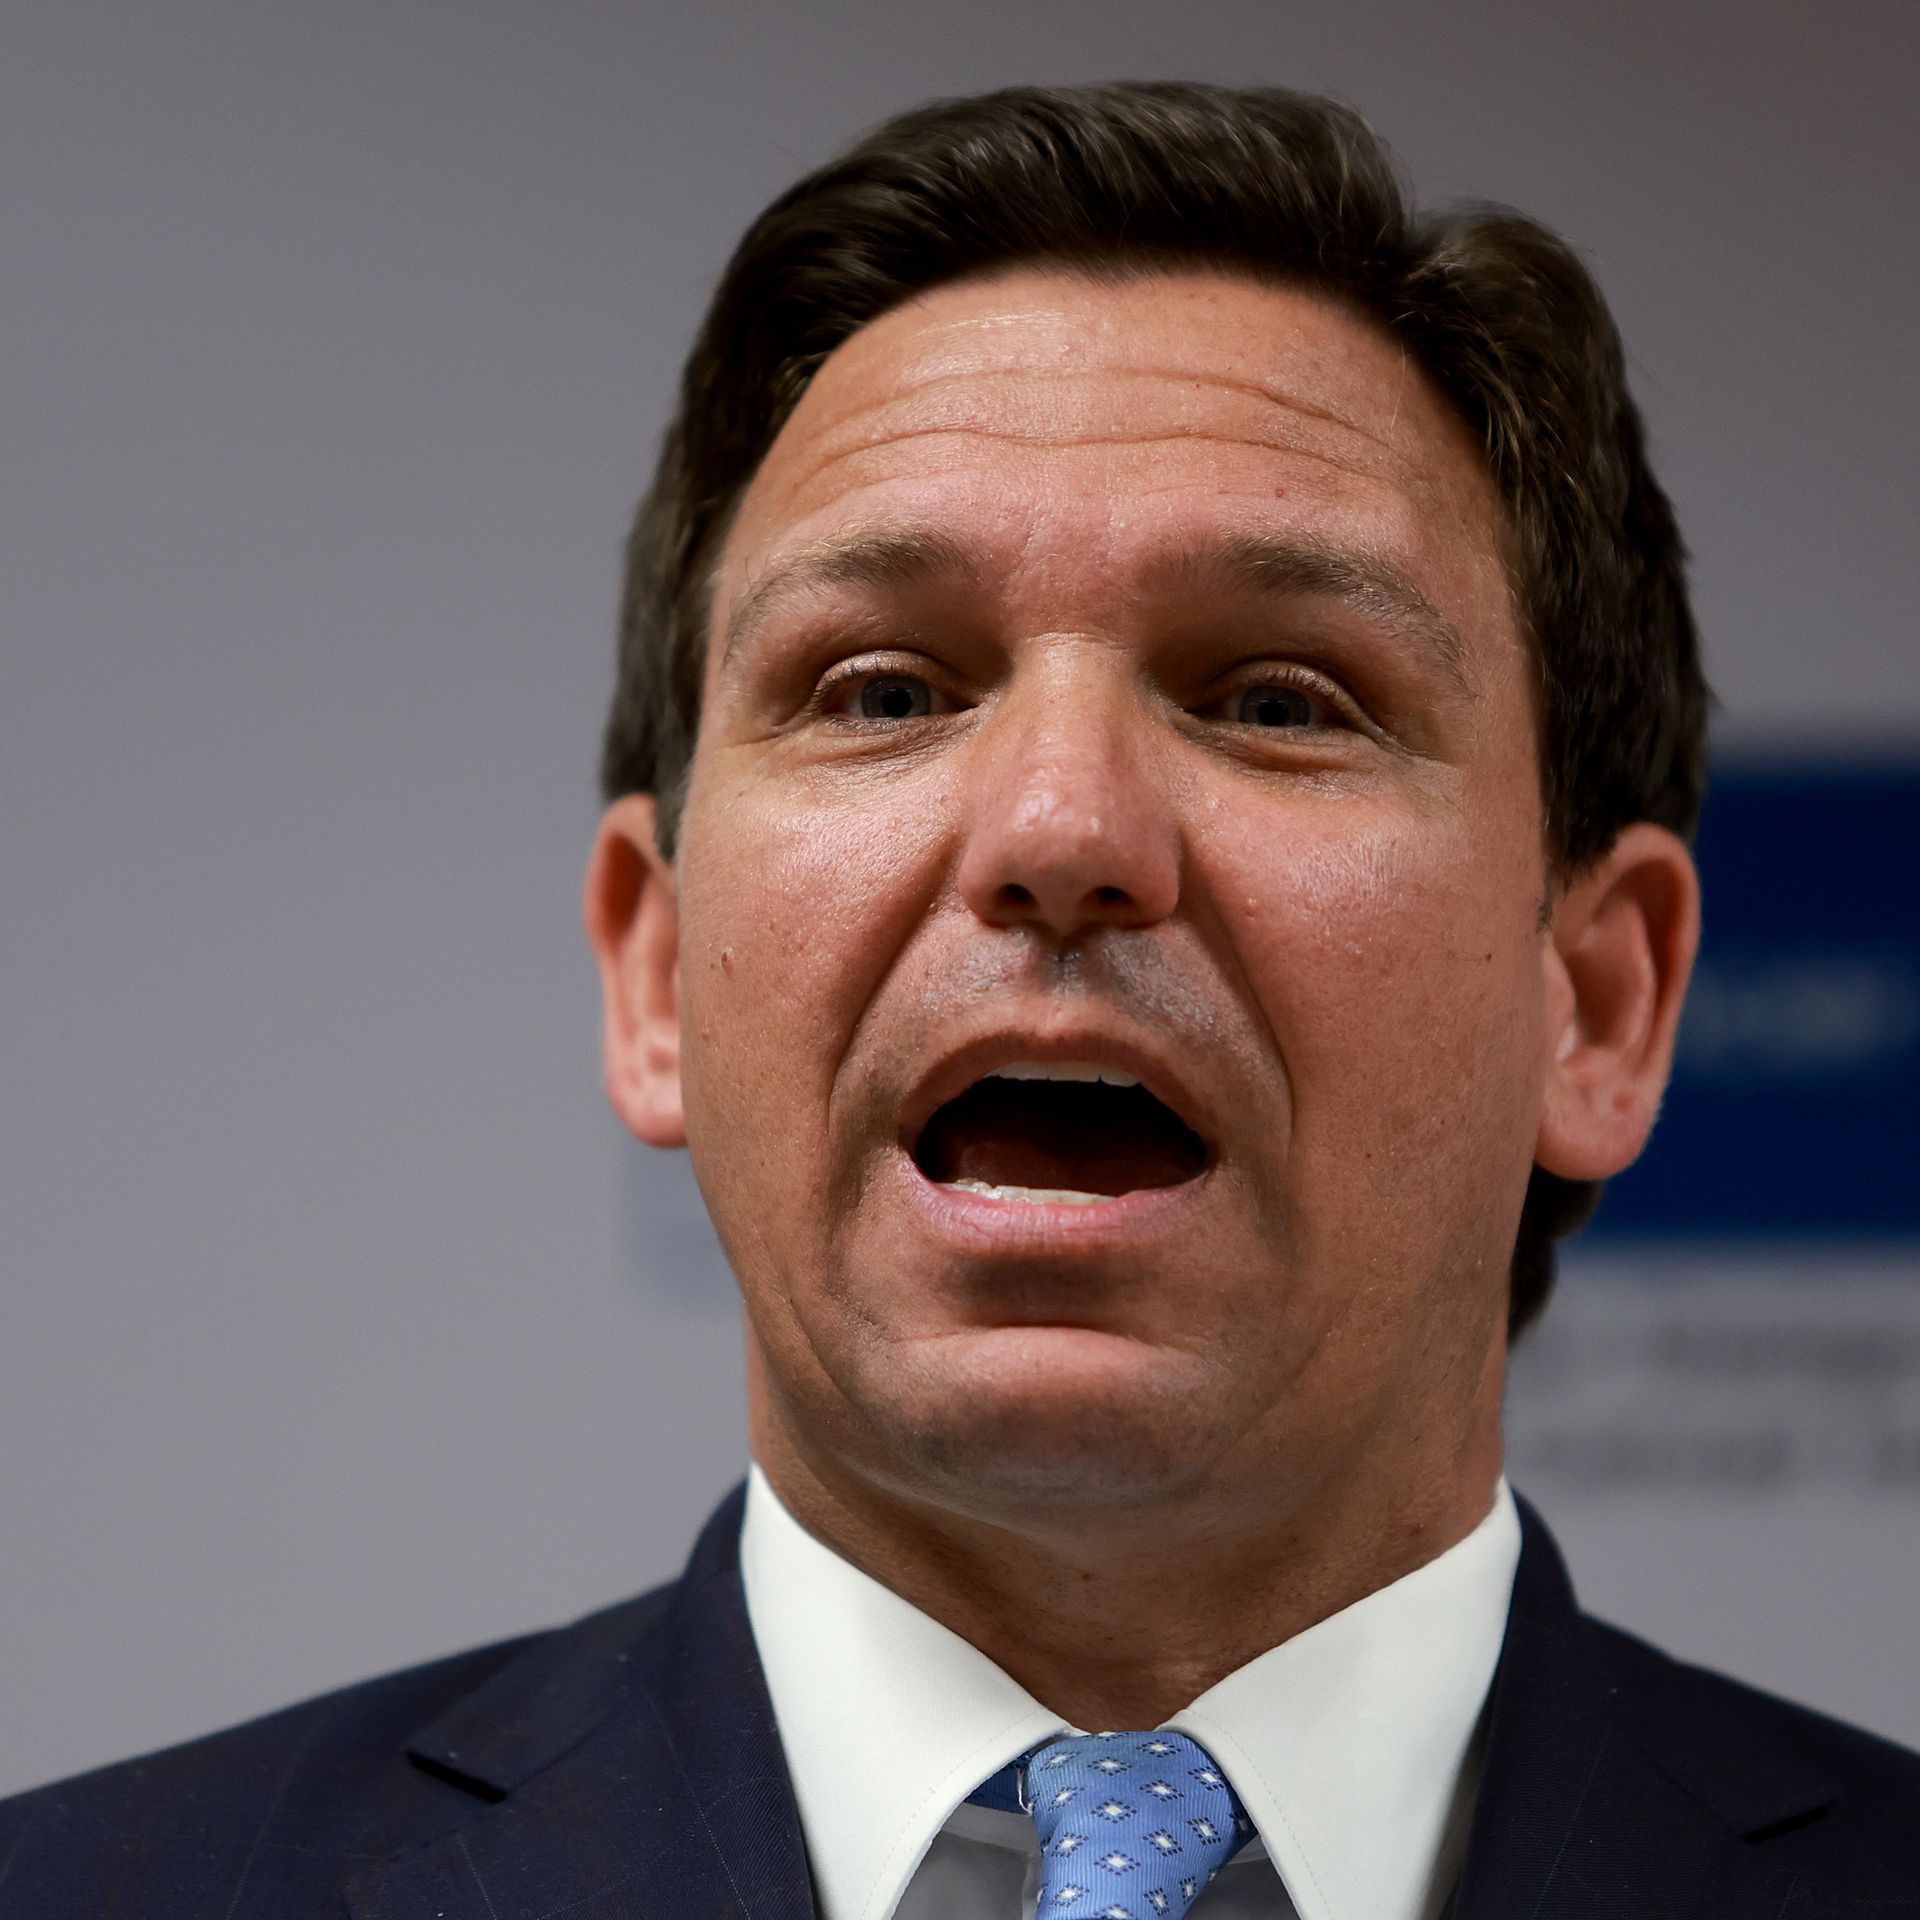 Florida Gov. Ron DeSantis speaks during a press conference at the University of Miami Health System.